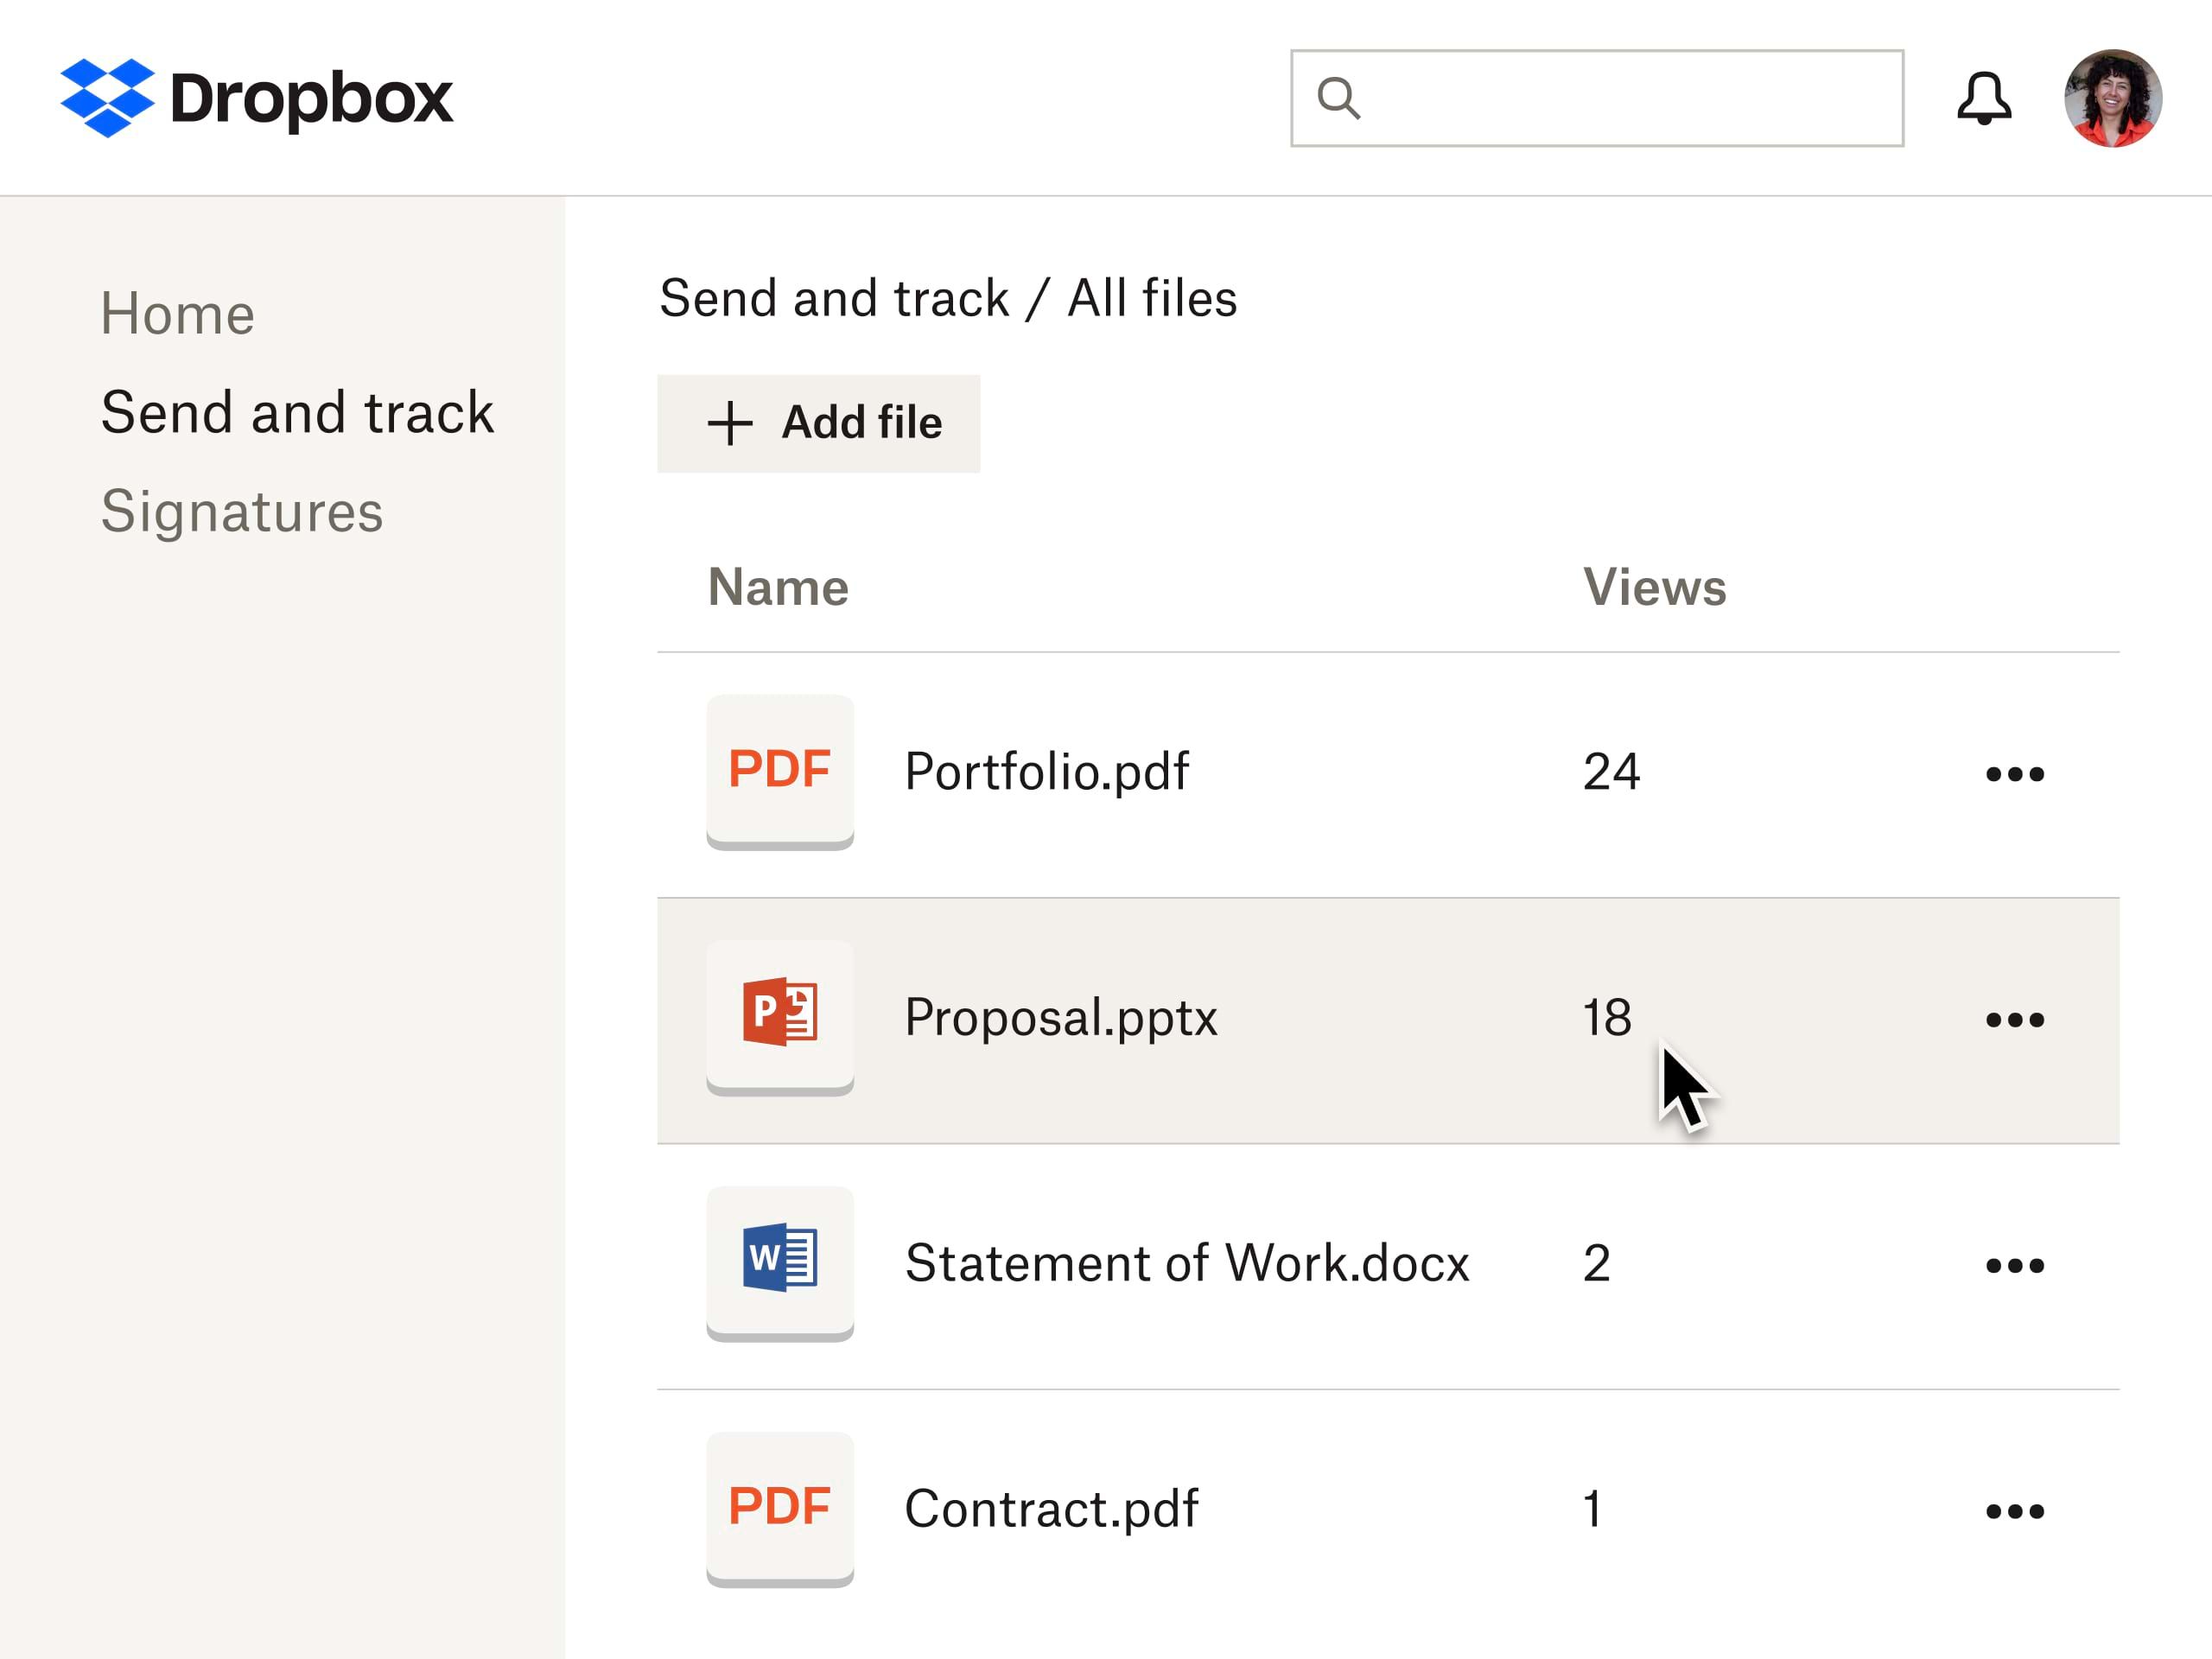 Send and track files UI in Dropbox